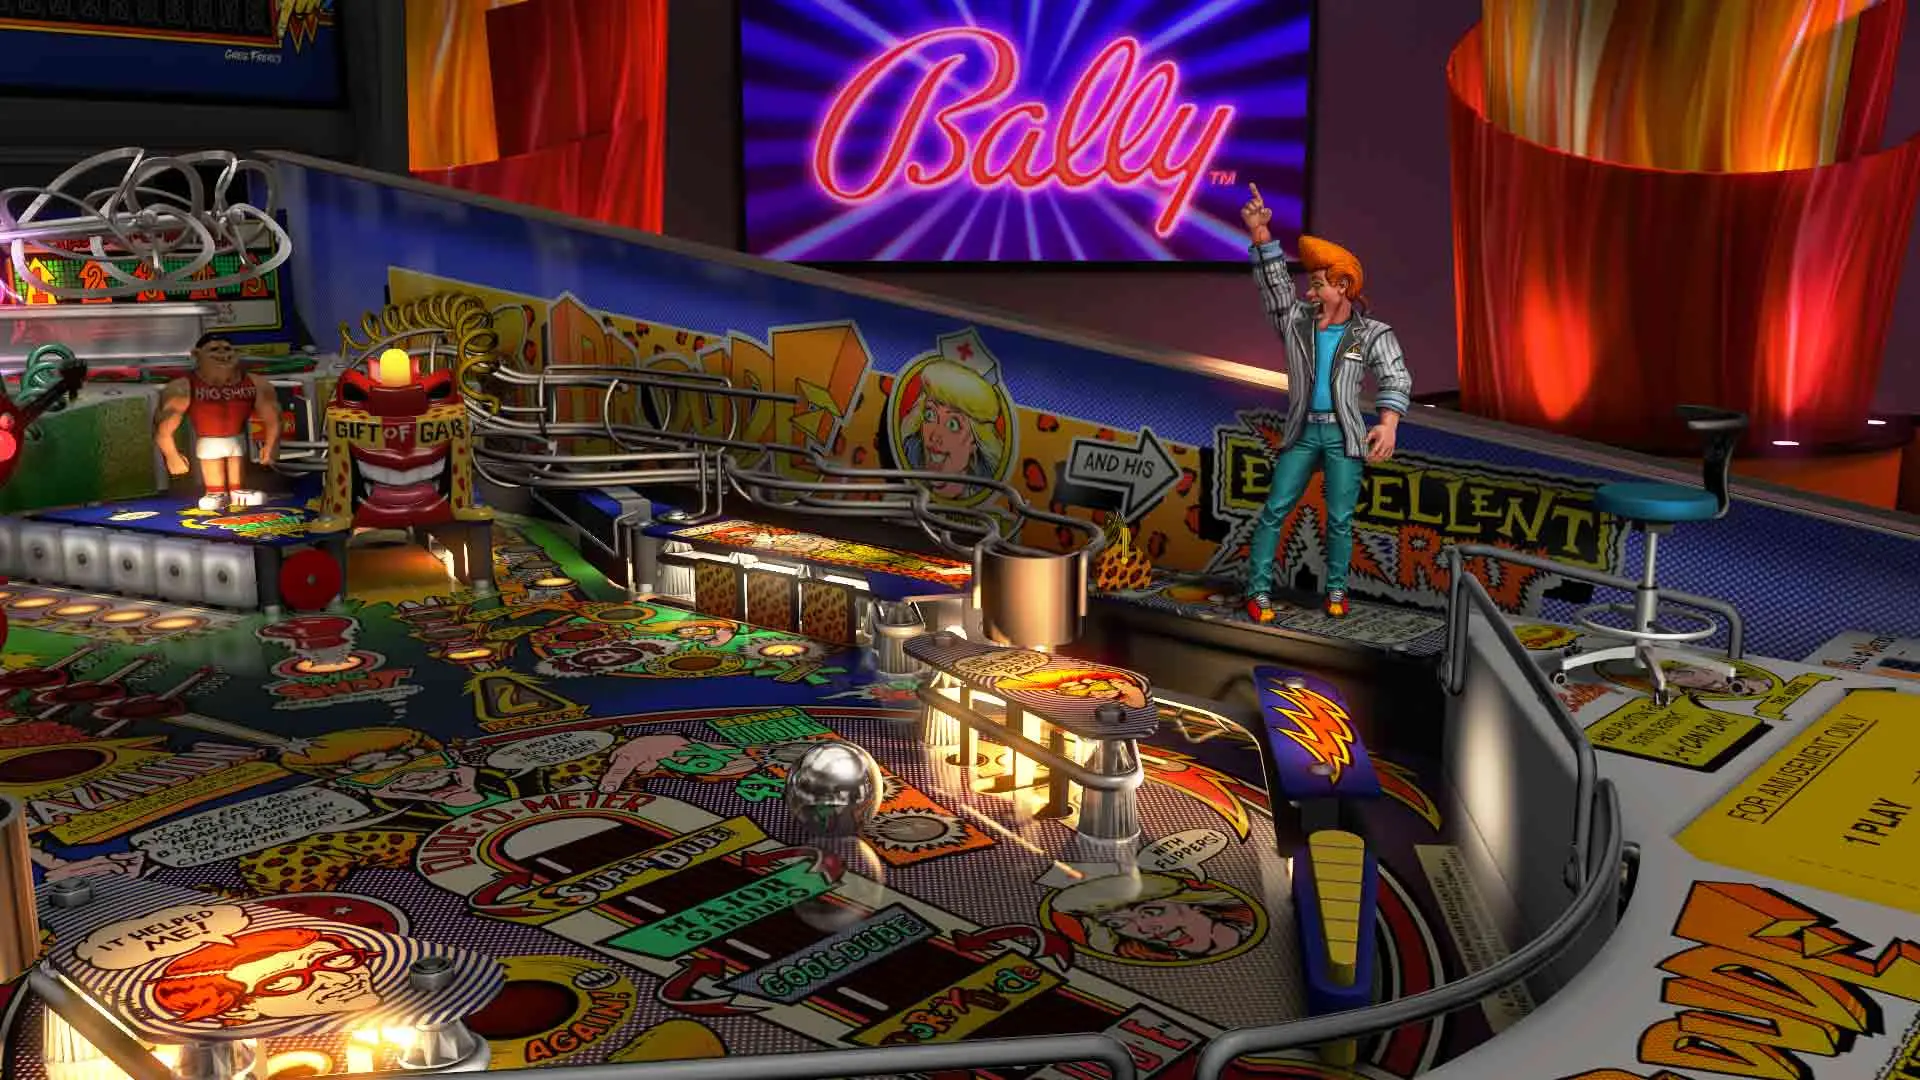 Dr. Dude and His Excellent Ray table in Williams Pinball: Volume 6 for Pinball FX3